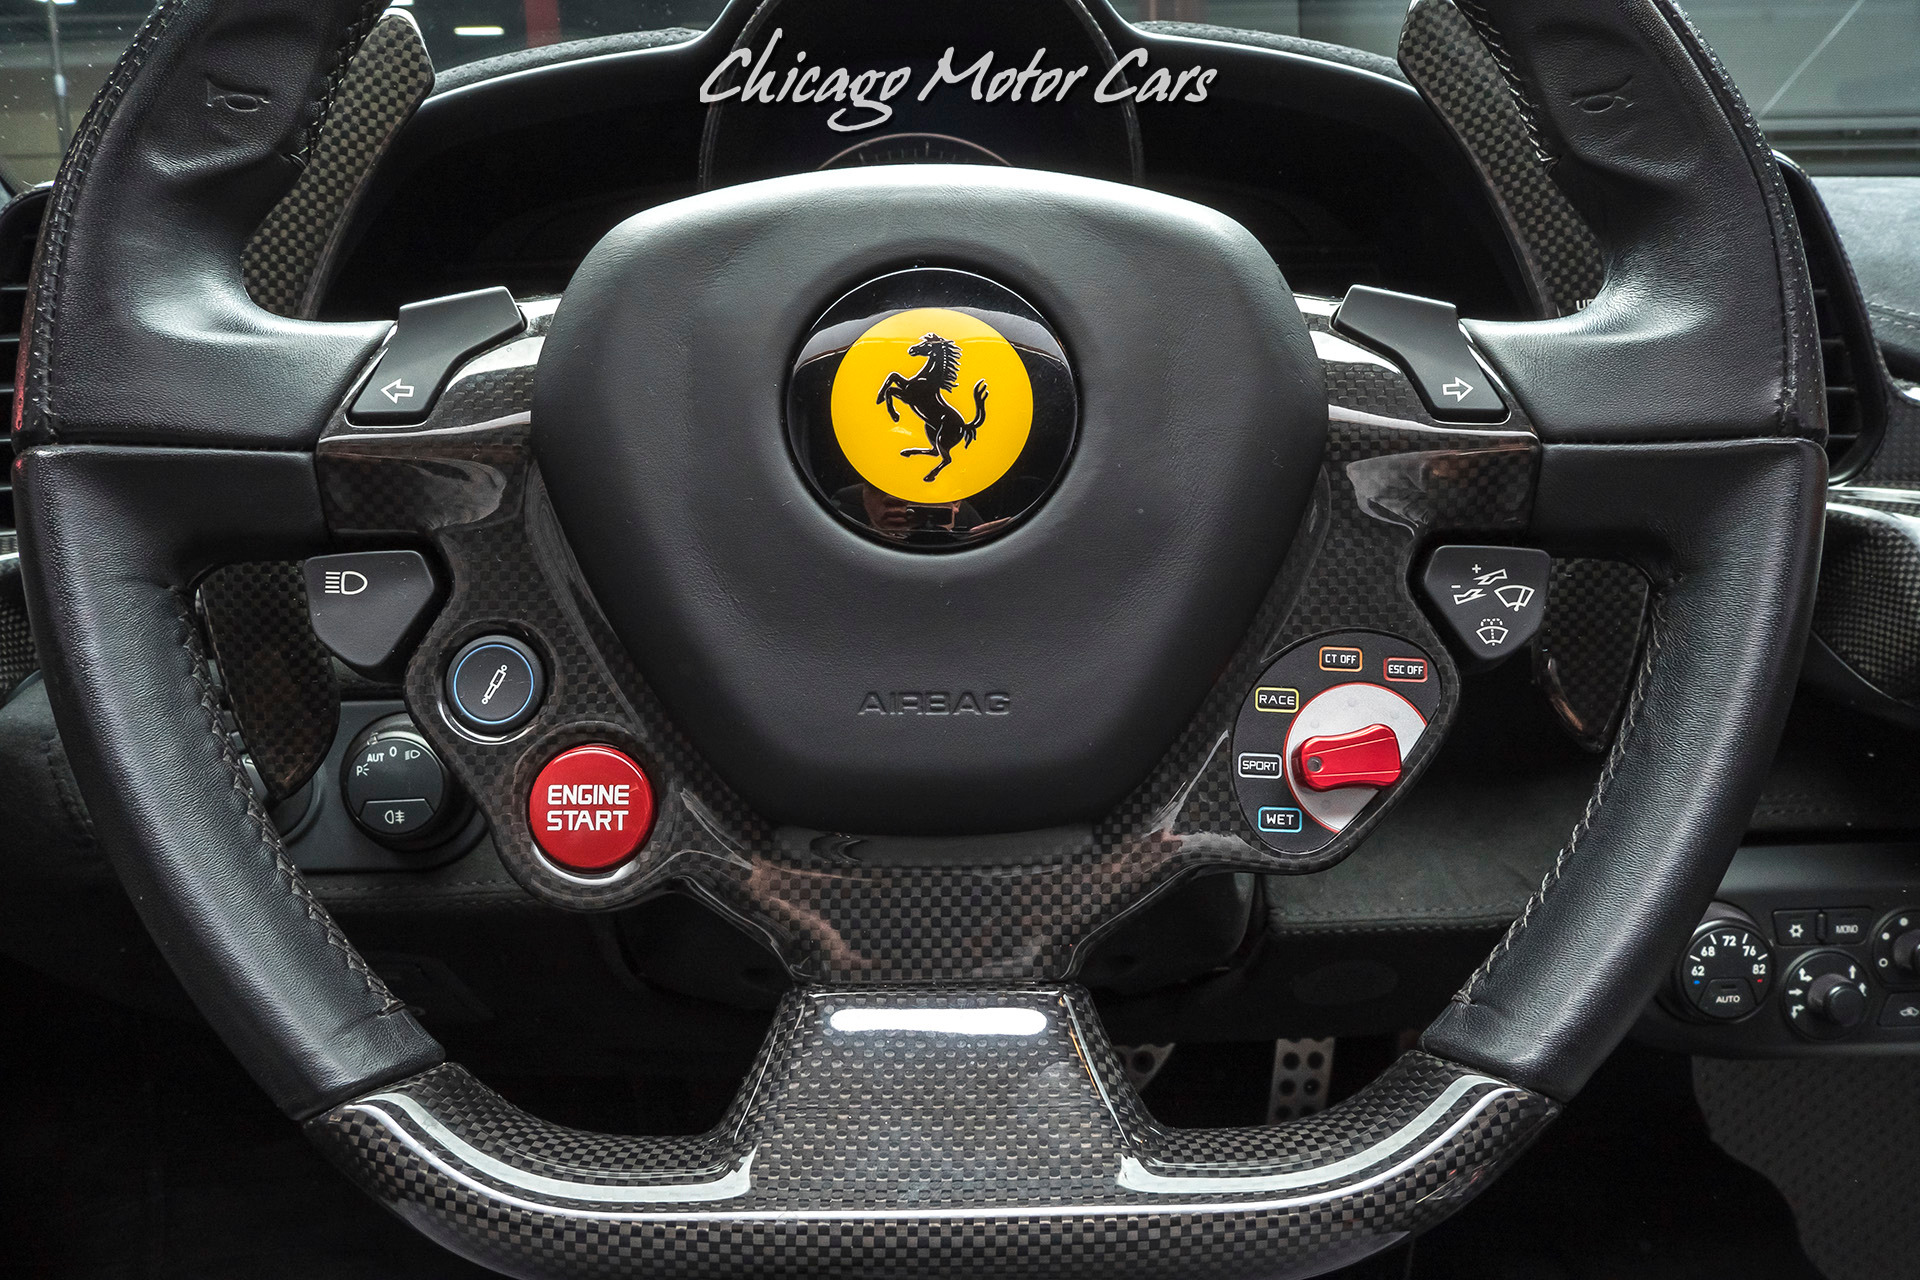 Used-2015-Ferrari-458-Speciale-Aperta-1-of-499-PRODUCED-WORLD-WIDE-HIGHLY-EXCLUSIVE